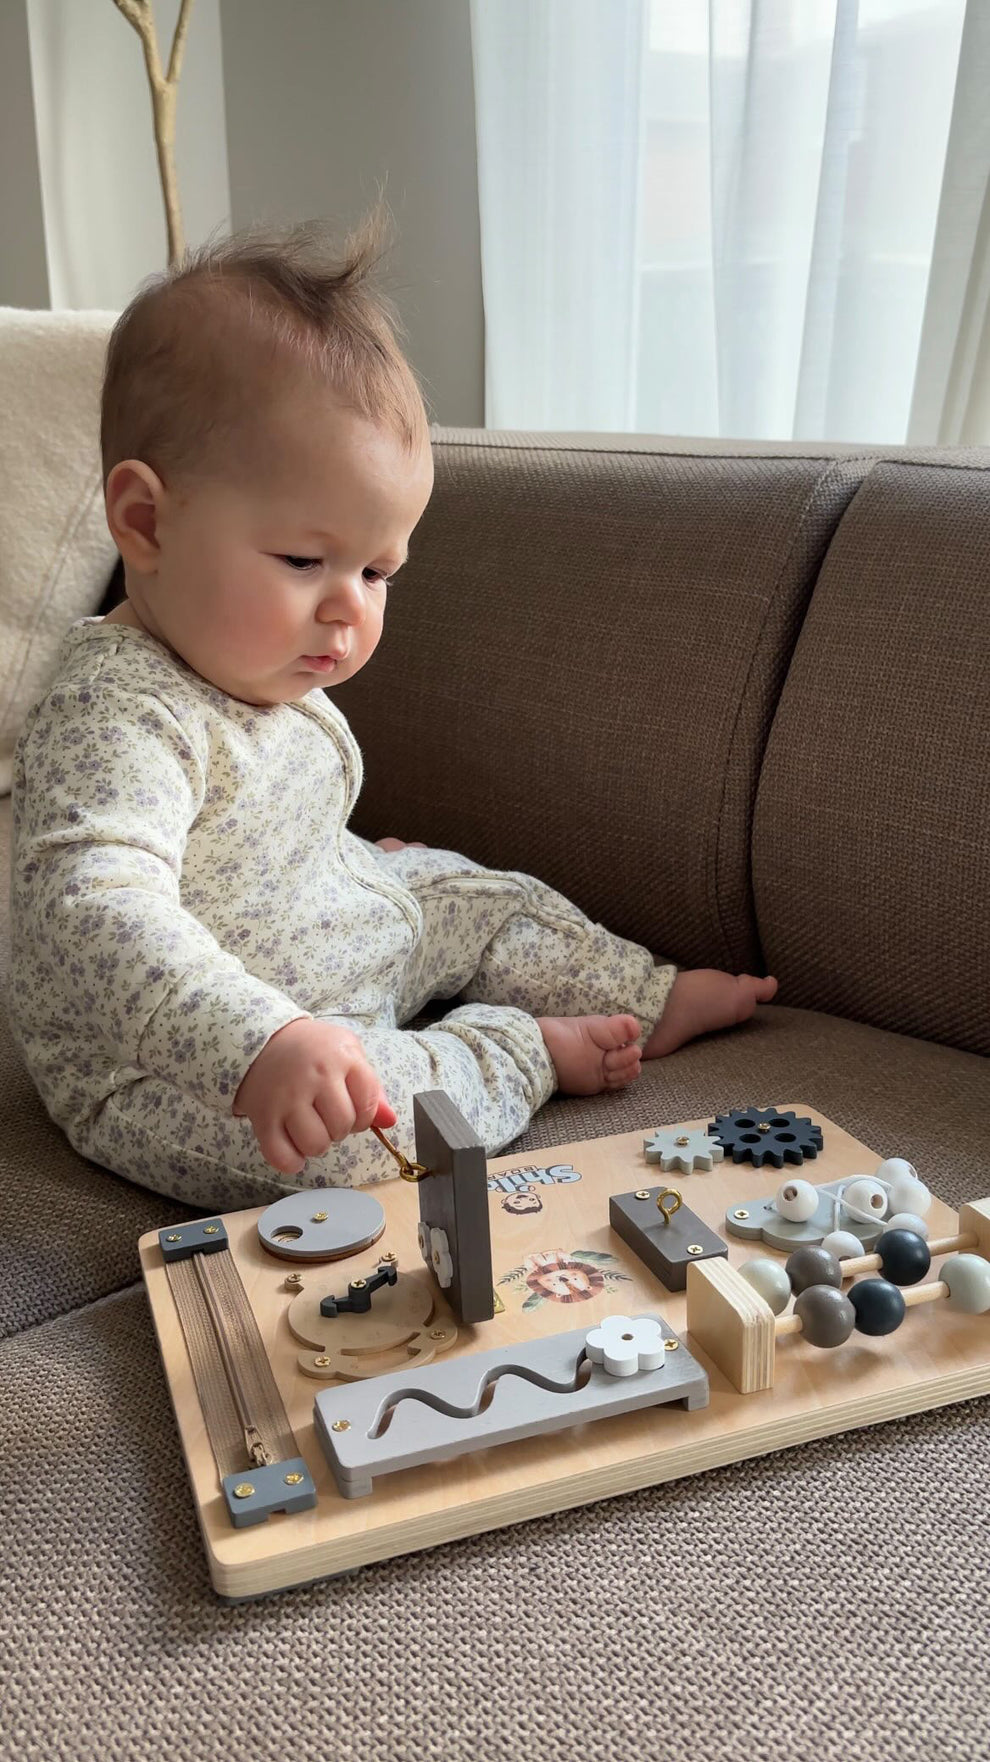 Baby playing with the Shiloh Board. Courtesy of Jenna Robbins (the.robinshome)